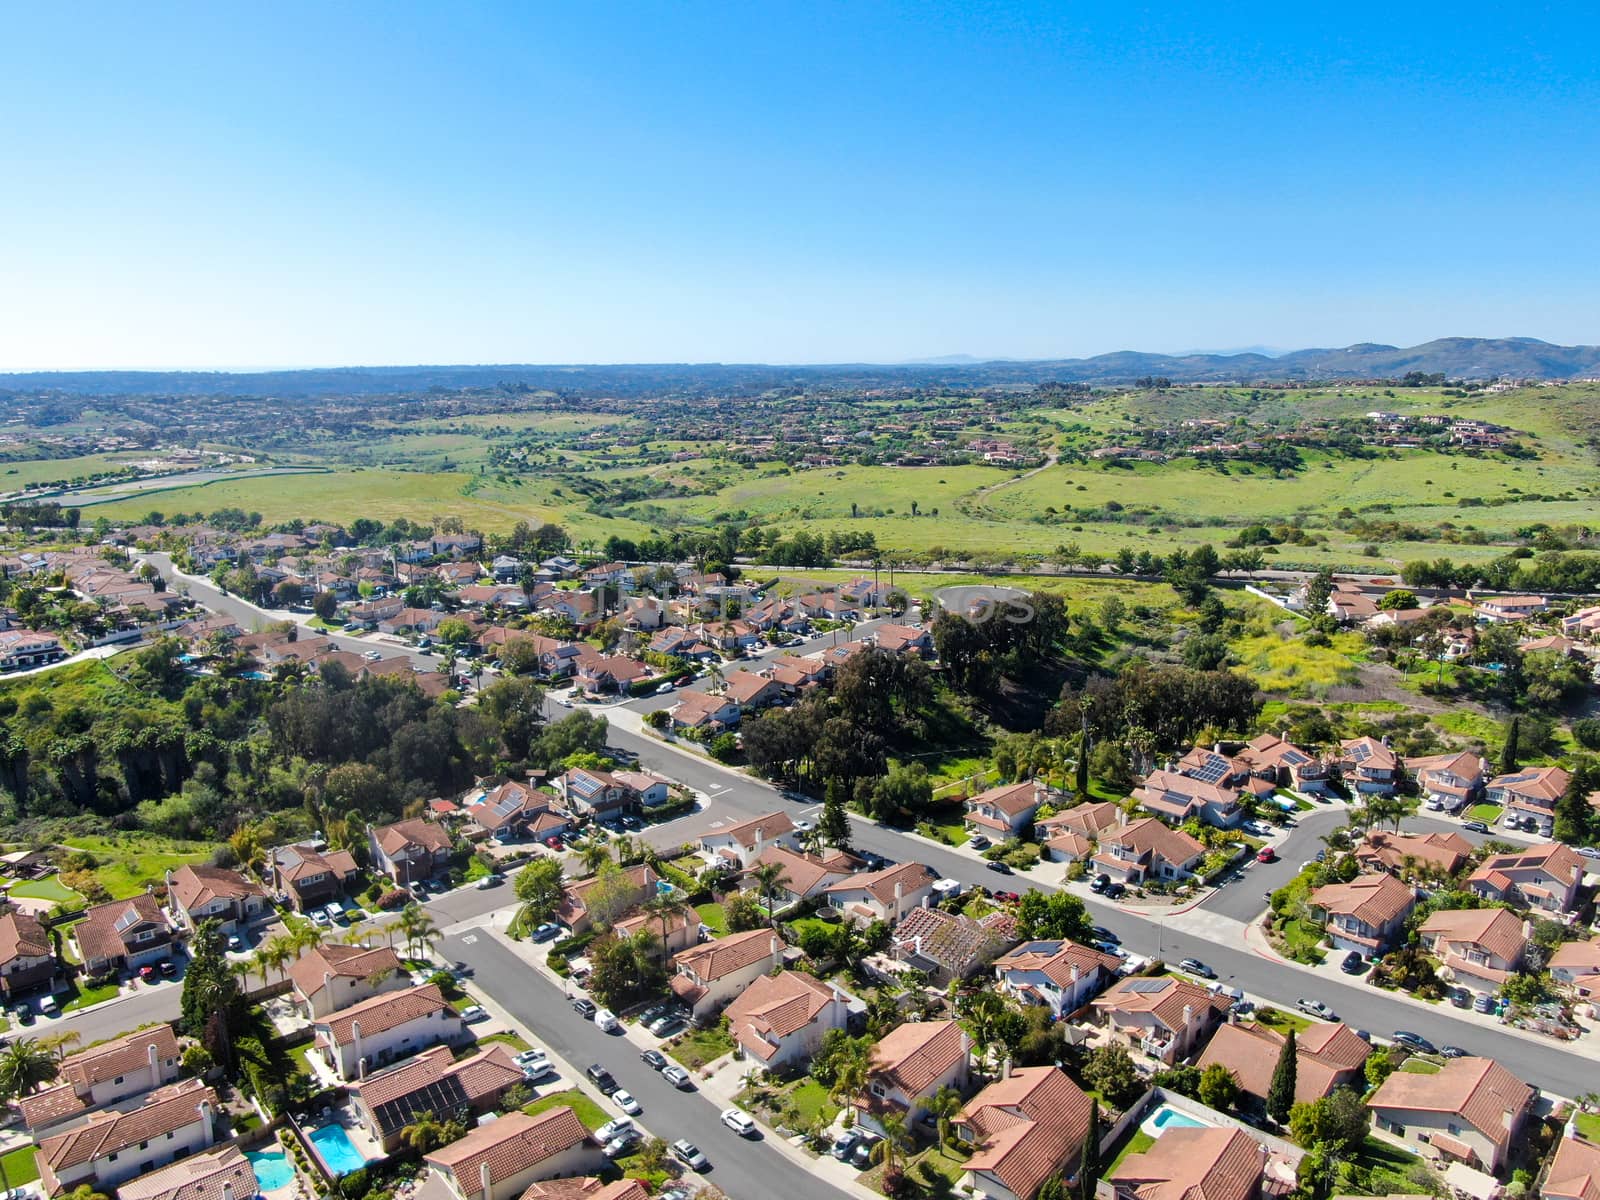 Aerial view of upper middle class neighborhood in the valley with blue sky by Bonandbon